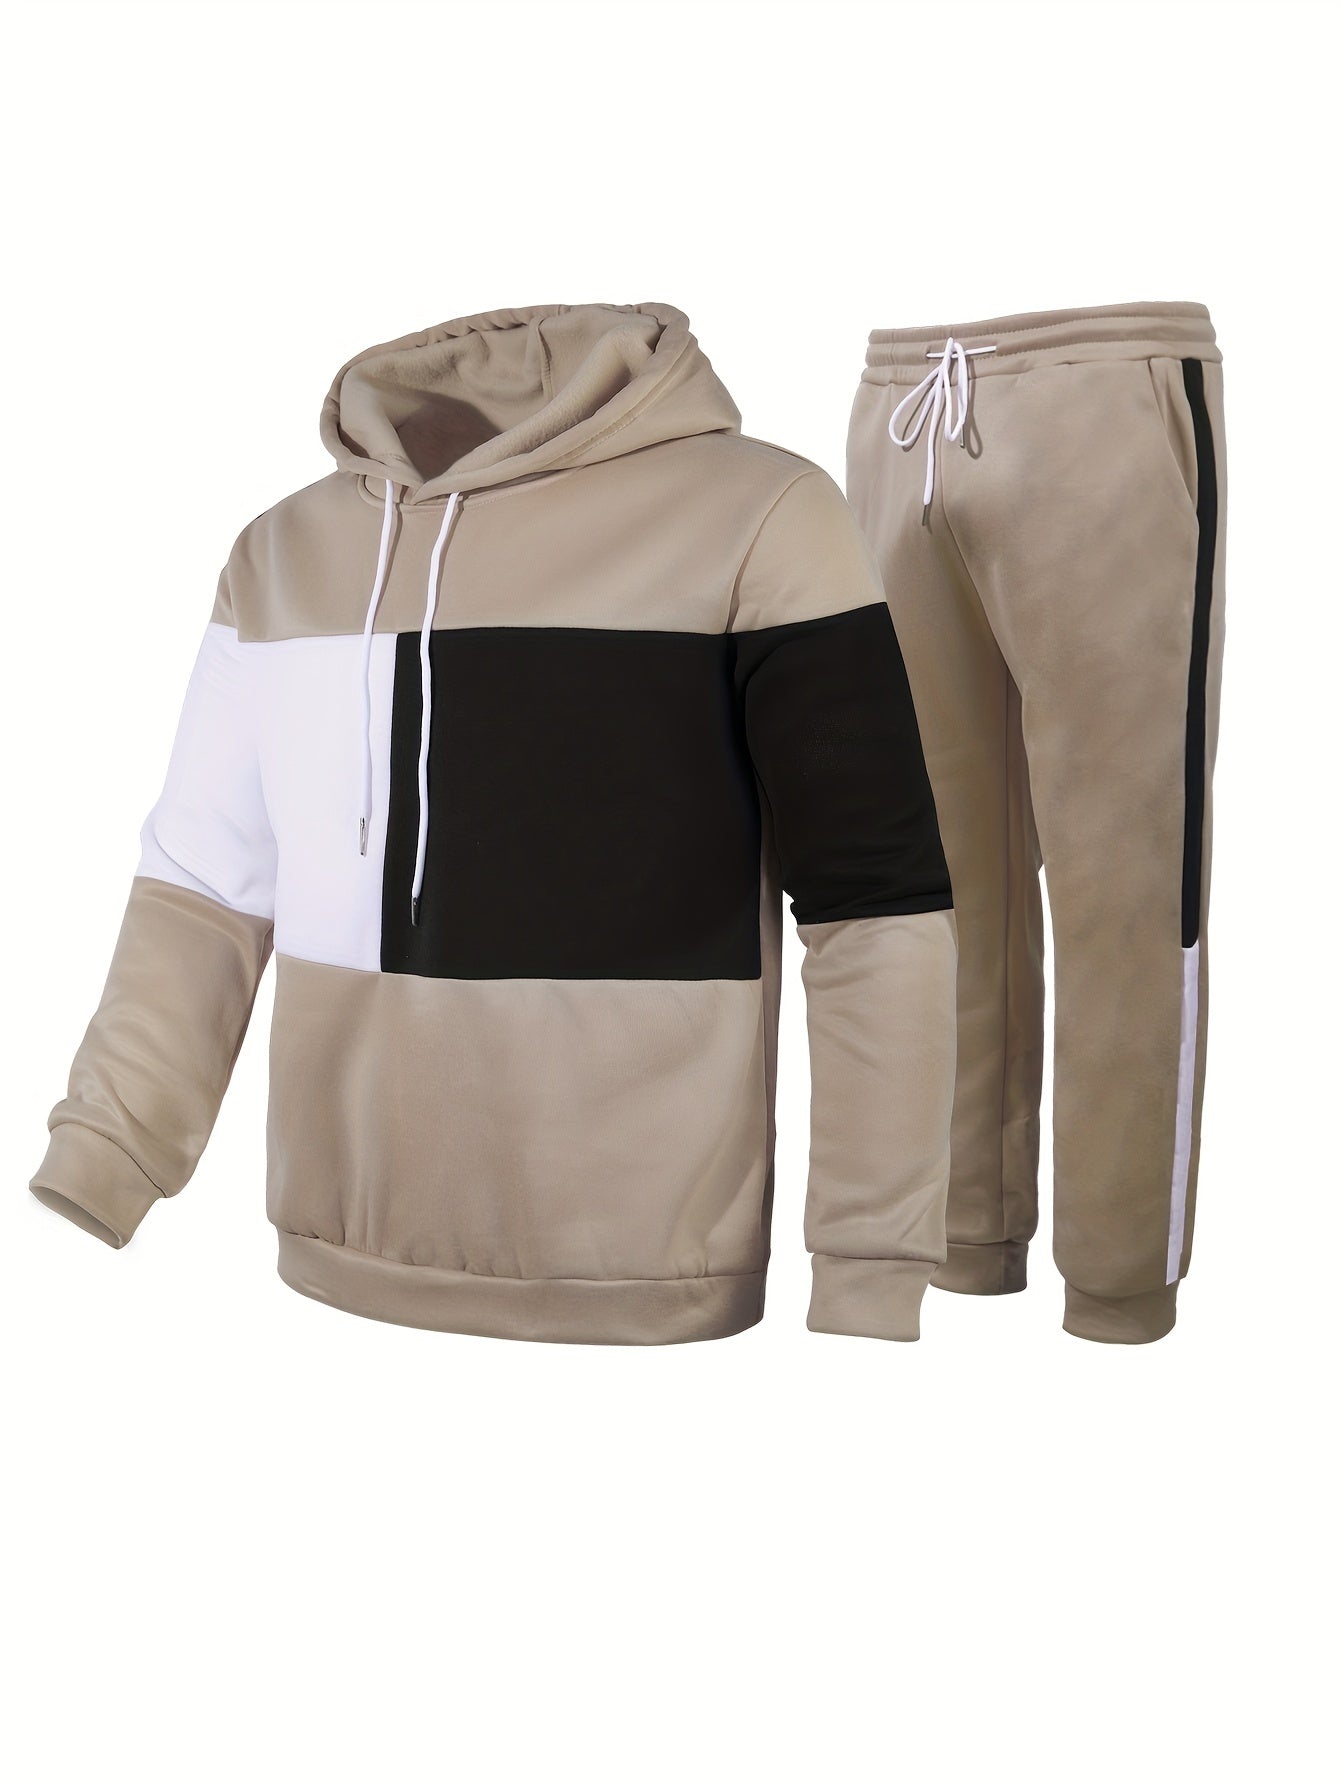 Men's Colorblock Hooded Sweatshirt Casual Outfit Set, 2 Pieces Long Sleeve Pullover Hoodies And Drawstring Sweatpants